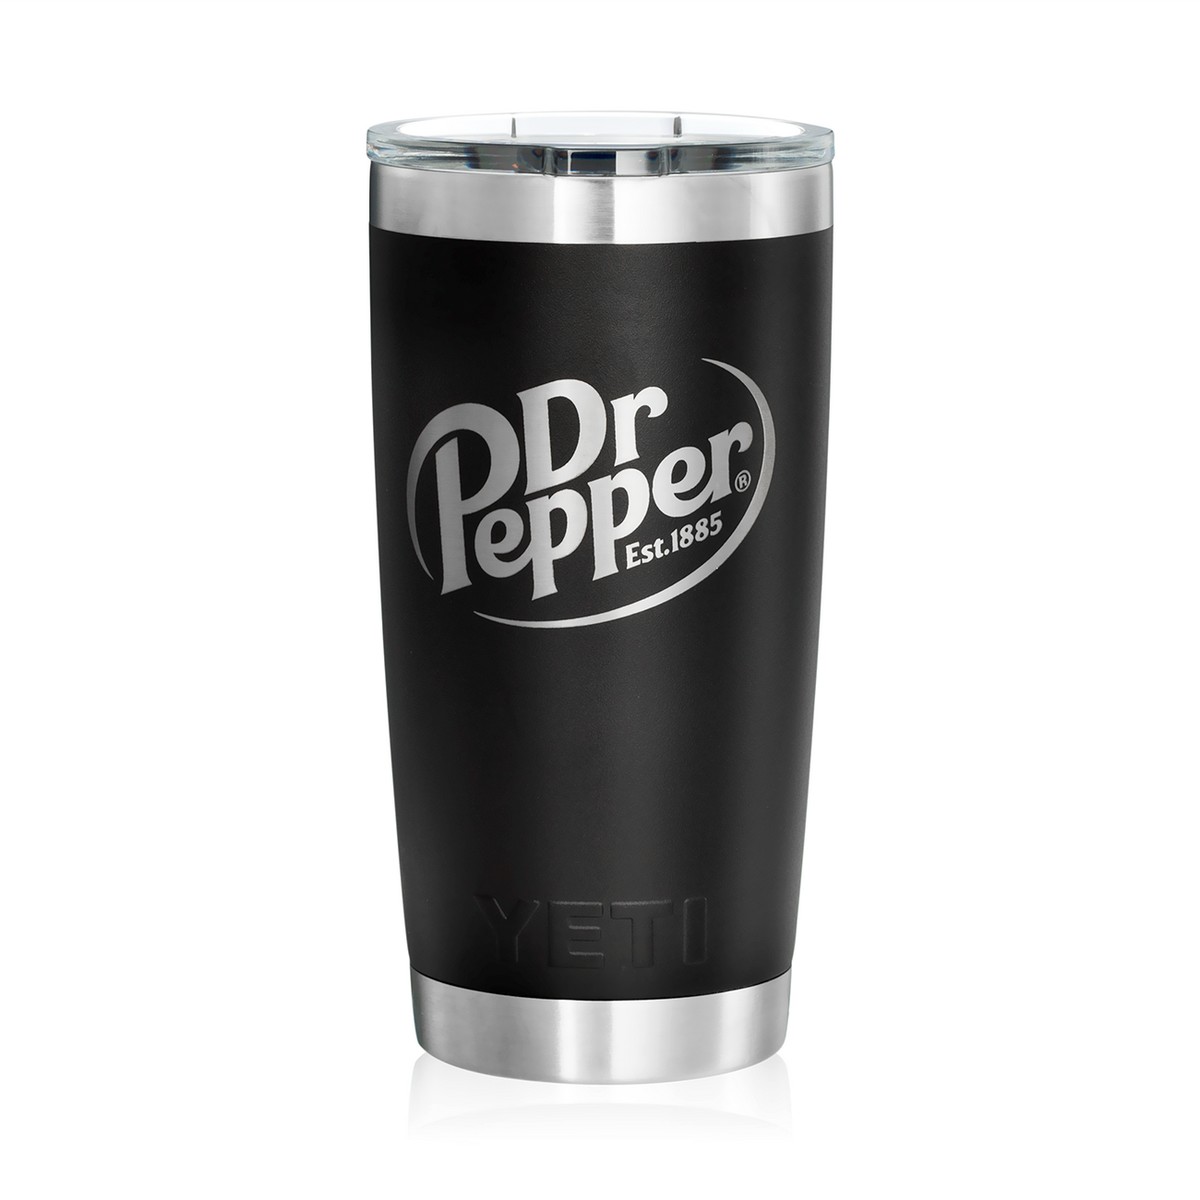 https://www.drpepperstore.com/store/20210906459/assets/items/largeimages/DPE0028.jpg